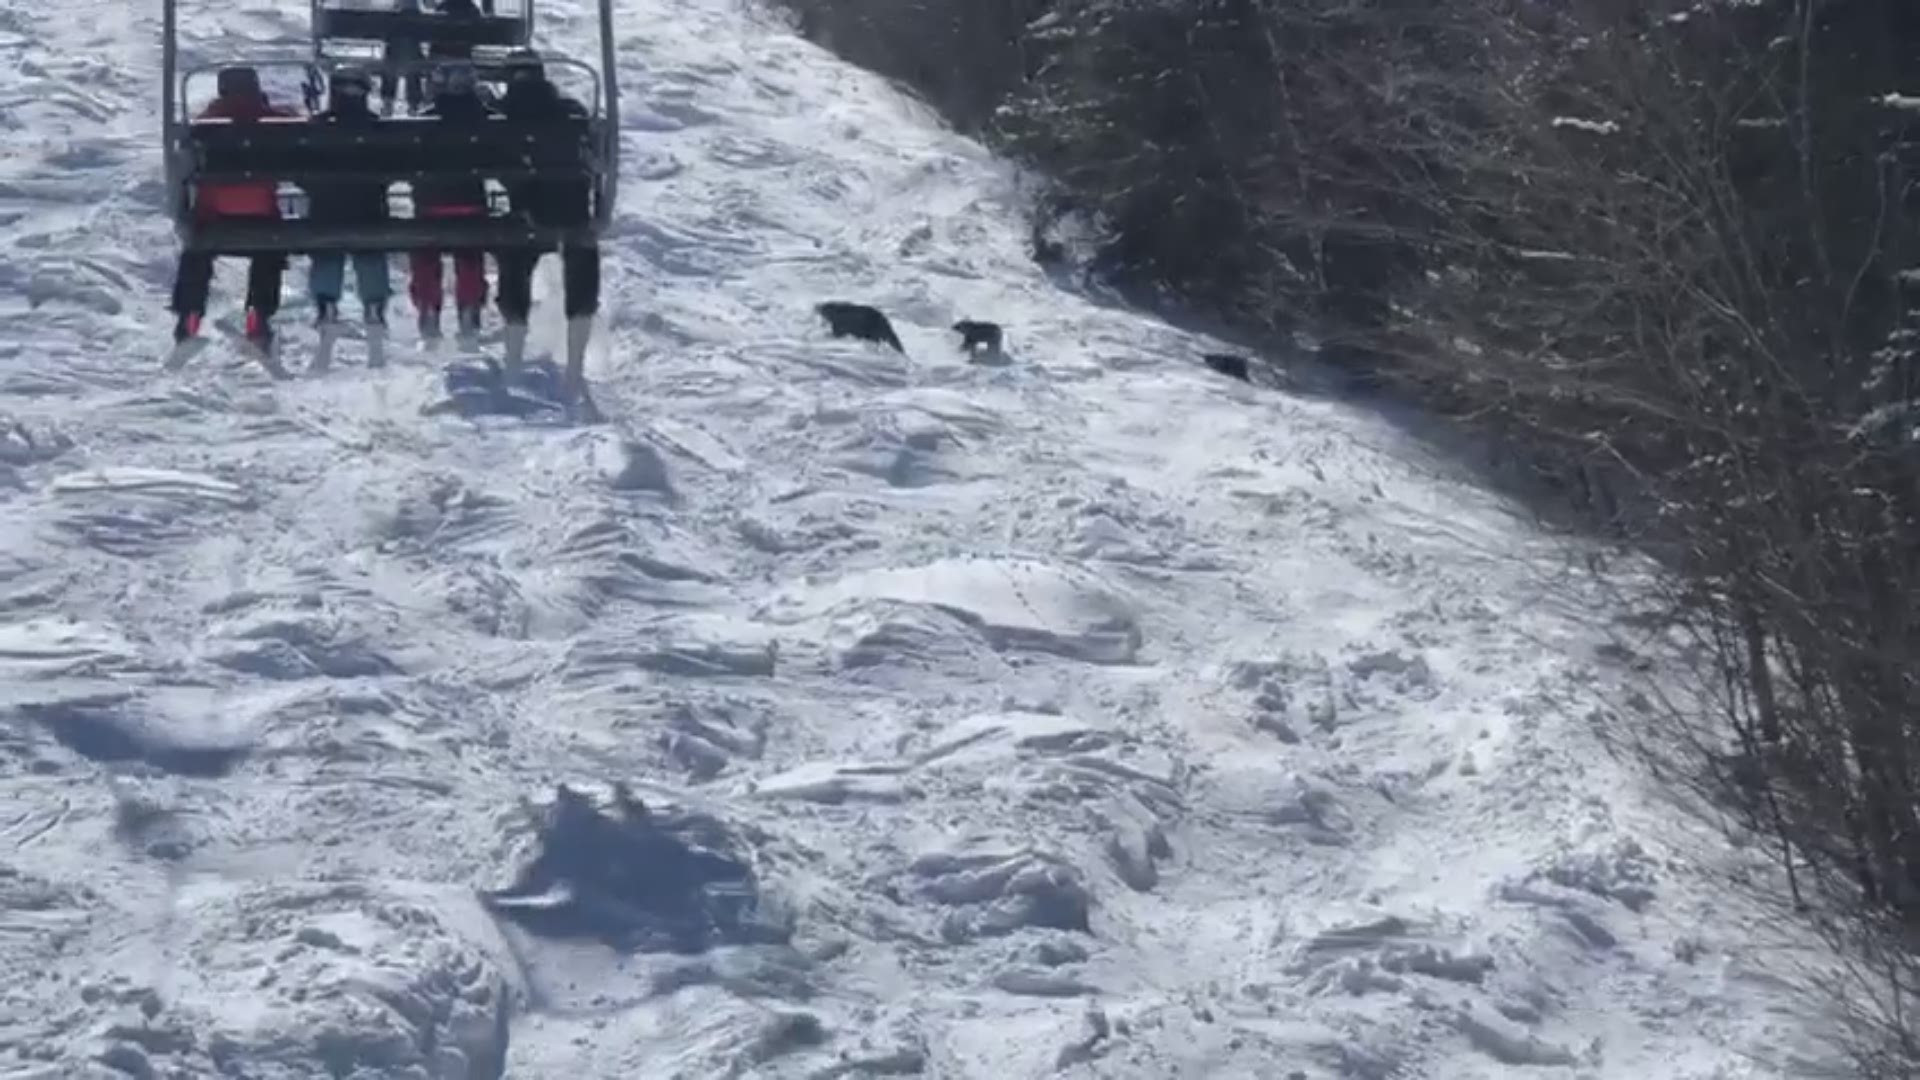 Zach Louison got the video of a lifetime when he captured a mother and her two yearling cubs hit the slopes at Sunday River on Thursday, April 11, while he was on the chairlift.